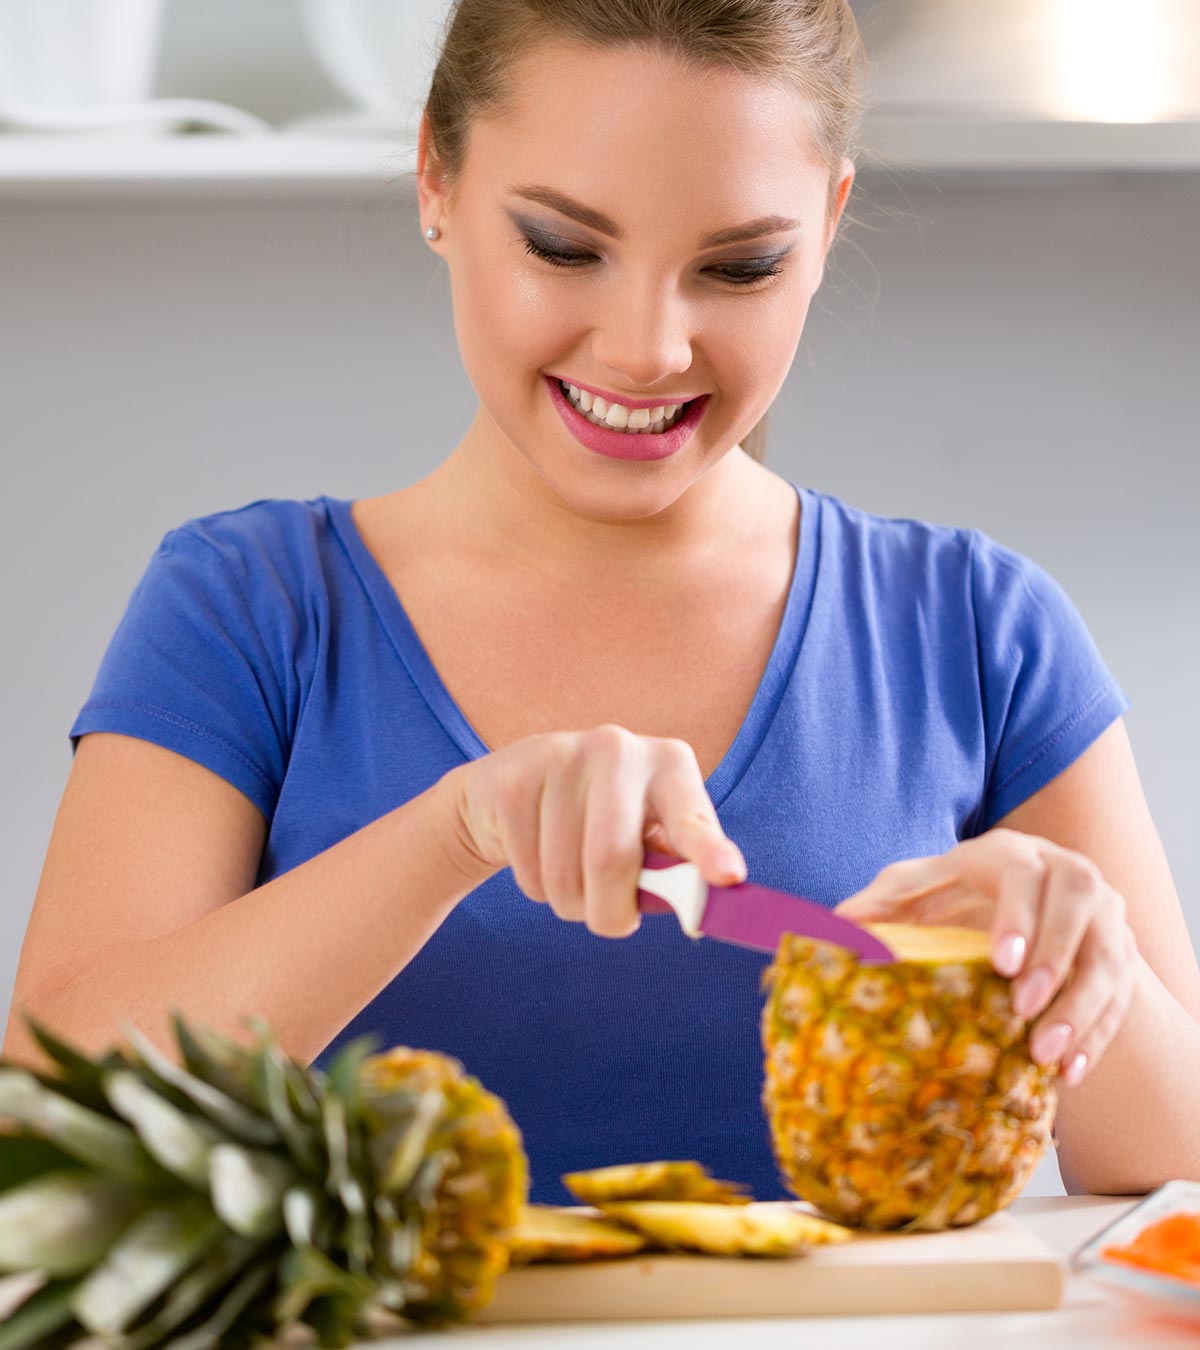 Eating Pineapple During Pregnancy